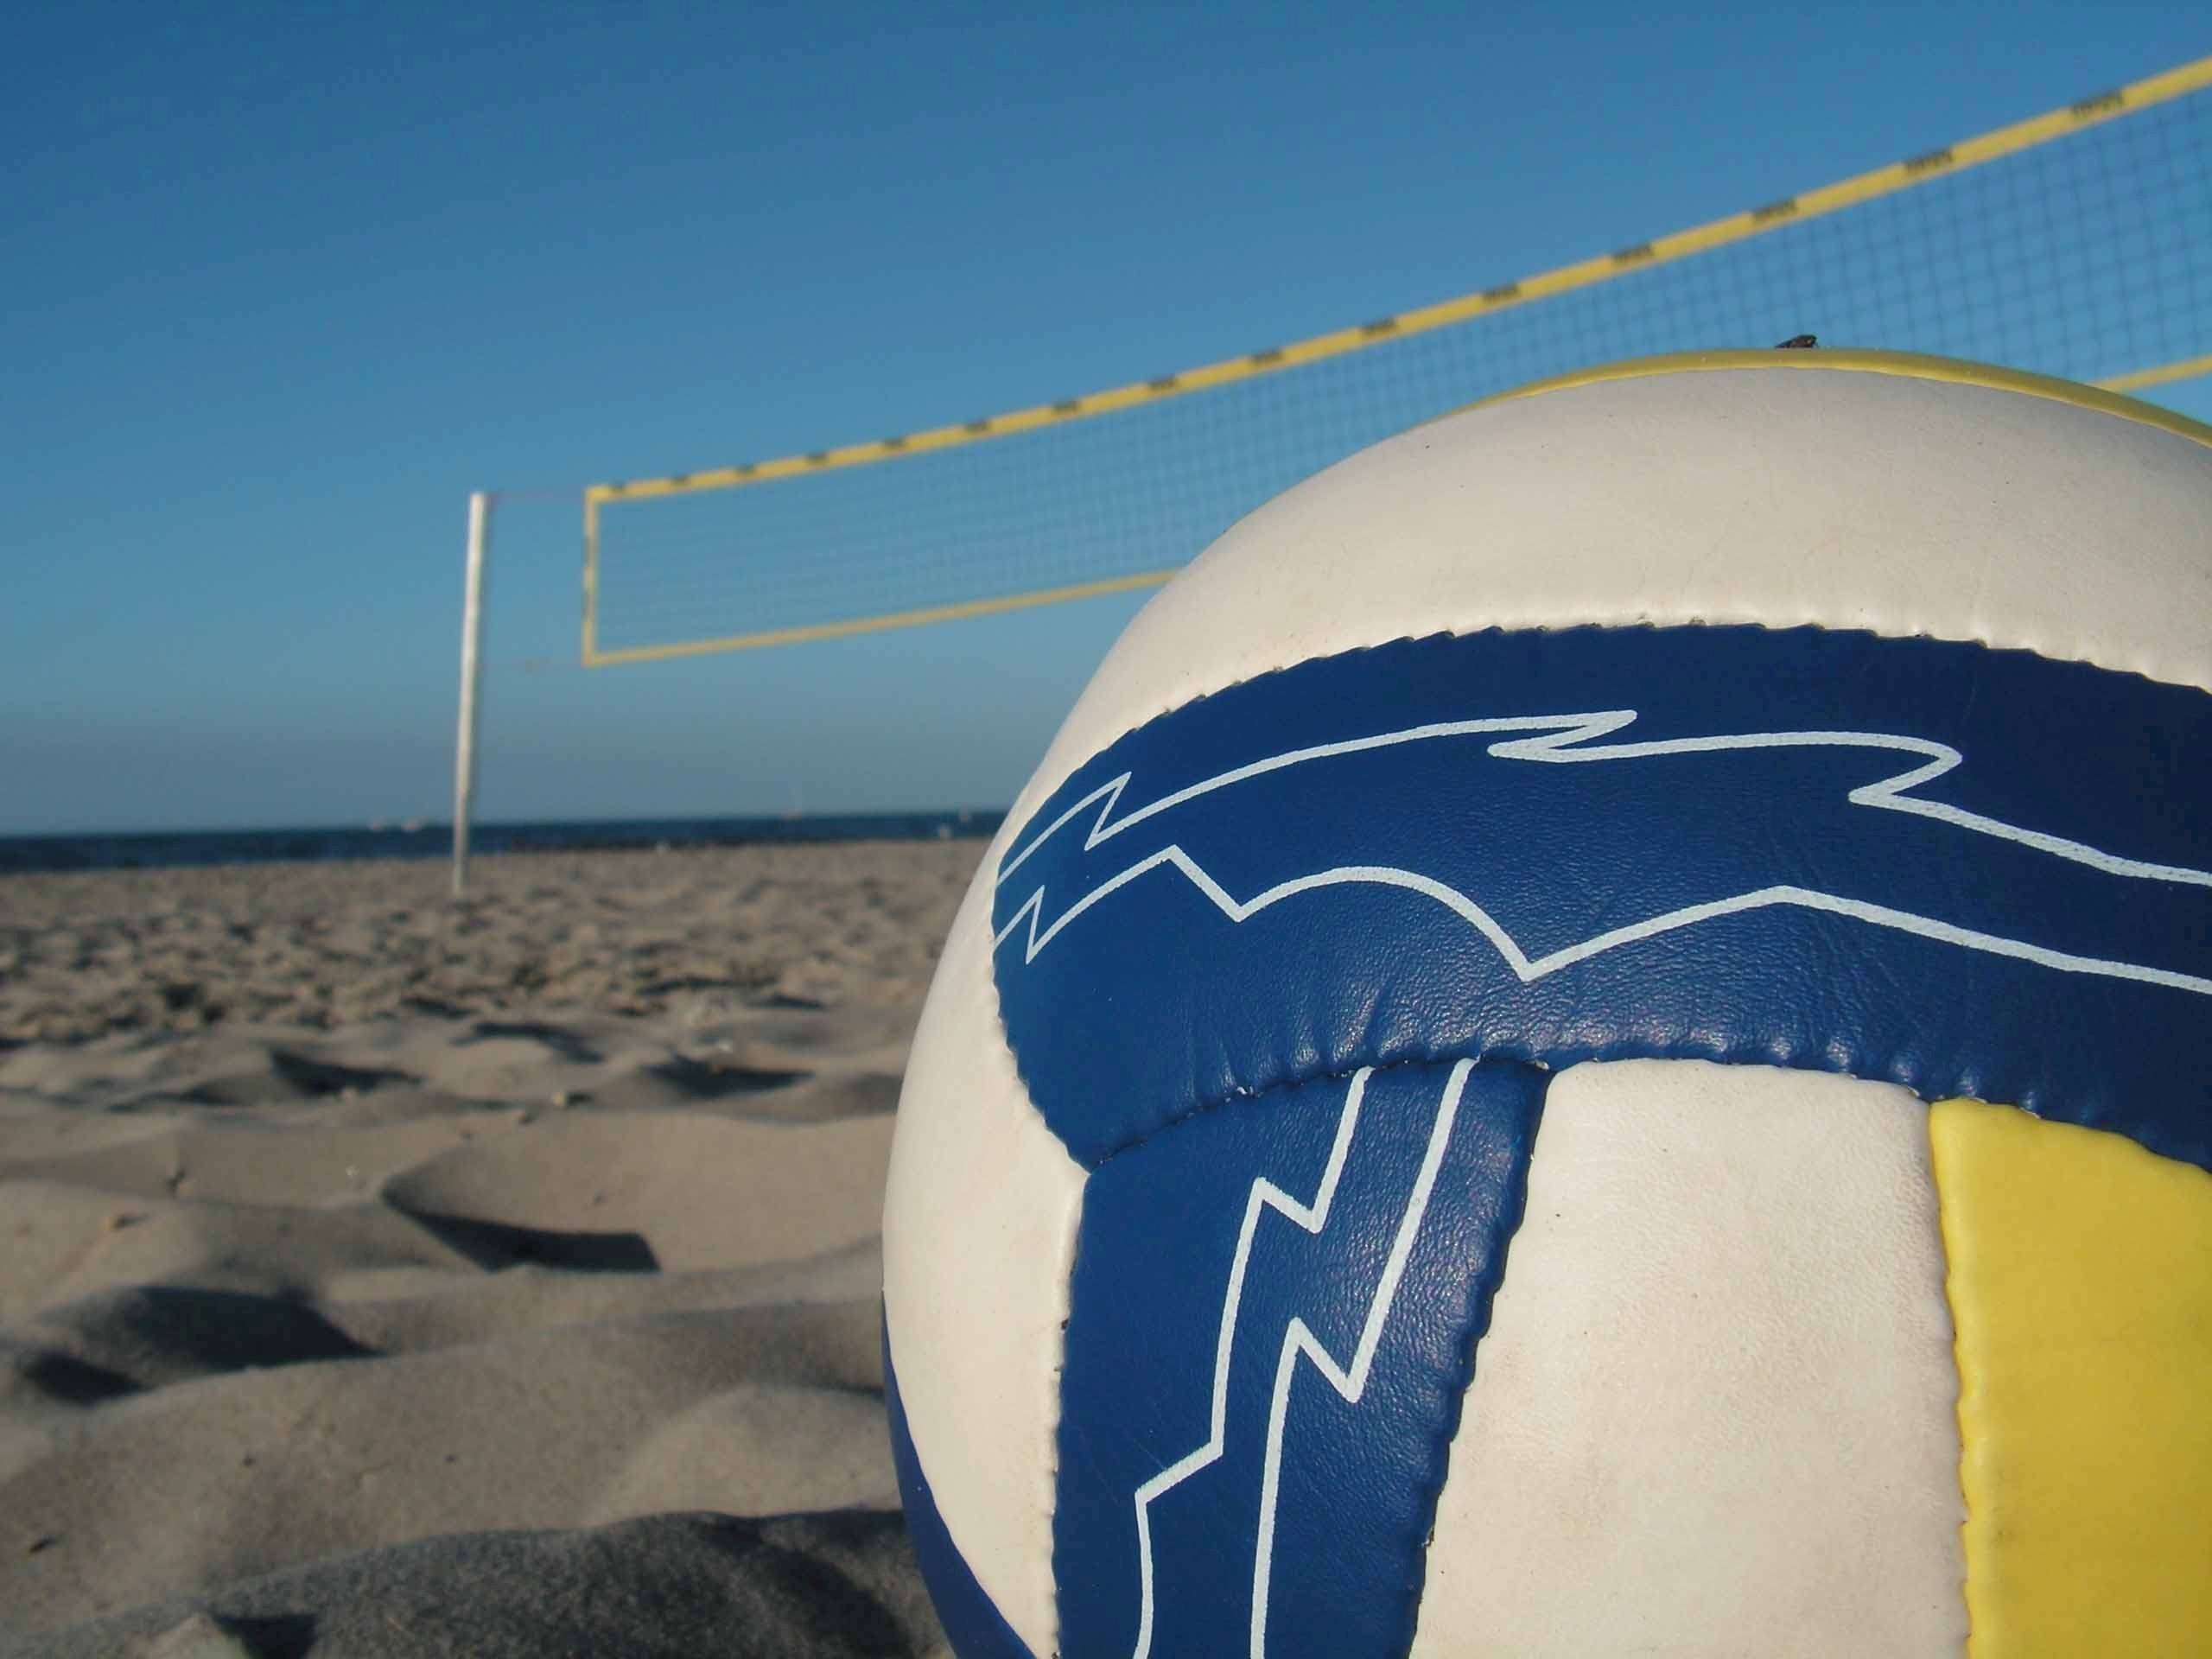 Volleyball Wallpapers HD